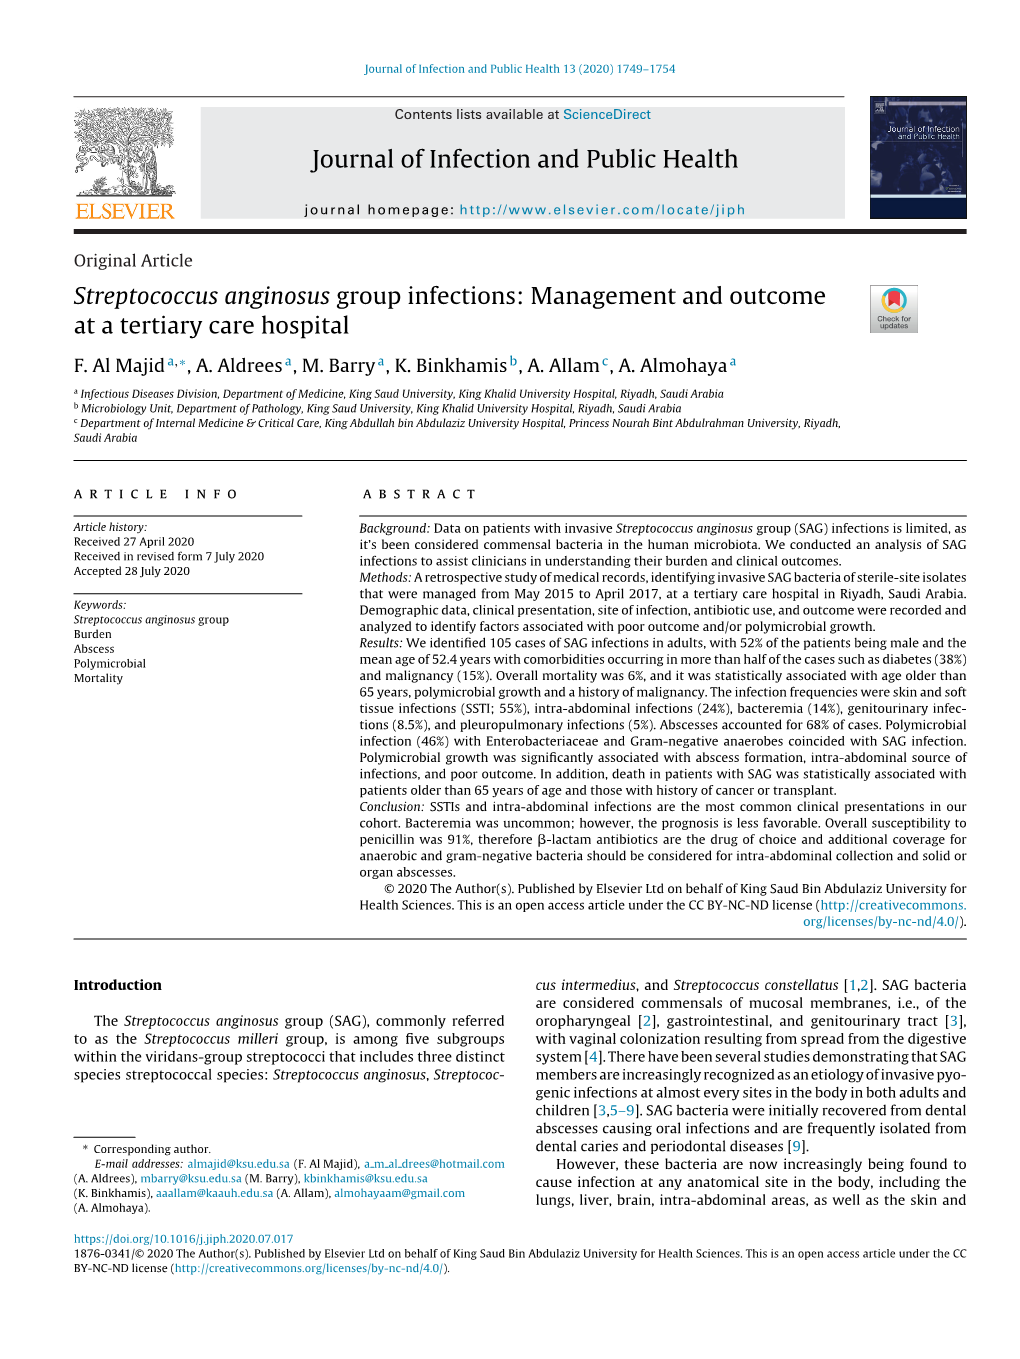 Streptococcus Anginosus Group Infections: Management and Outcome